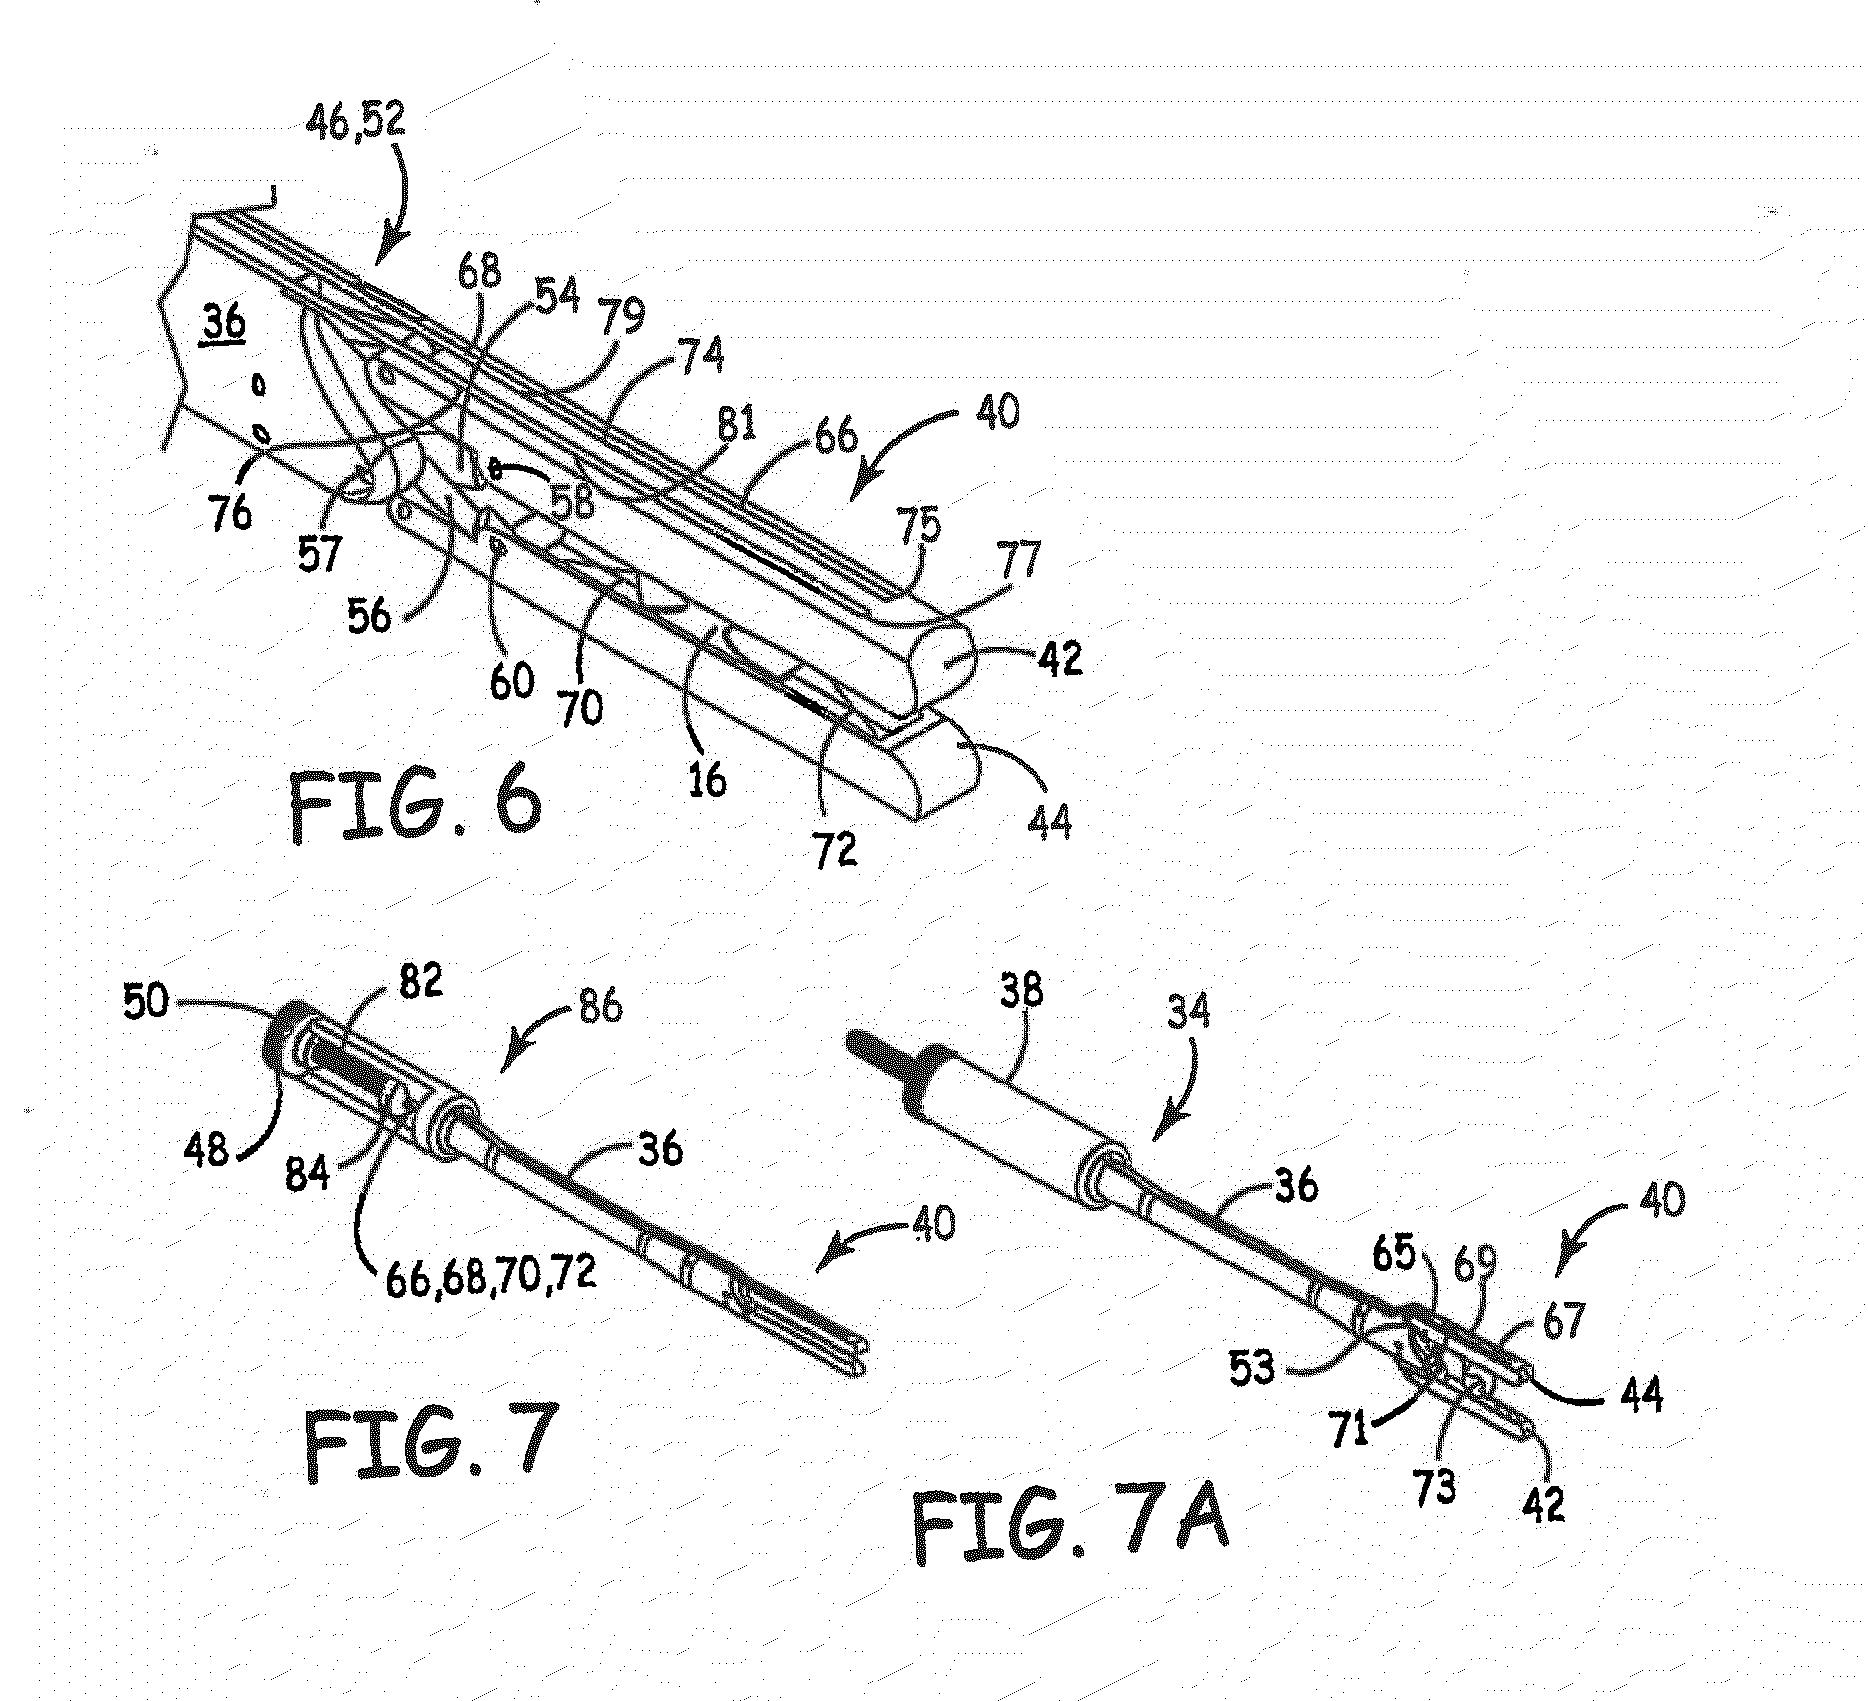 Methods and Devices for Occlusion of an Atrial Appendage